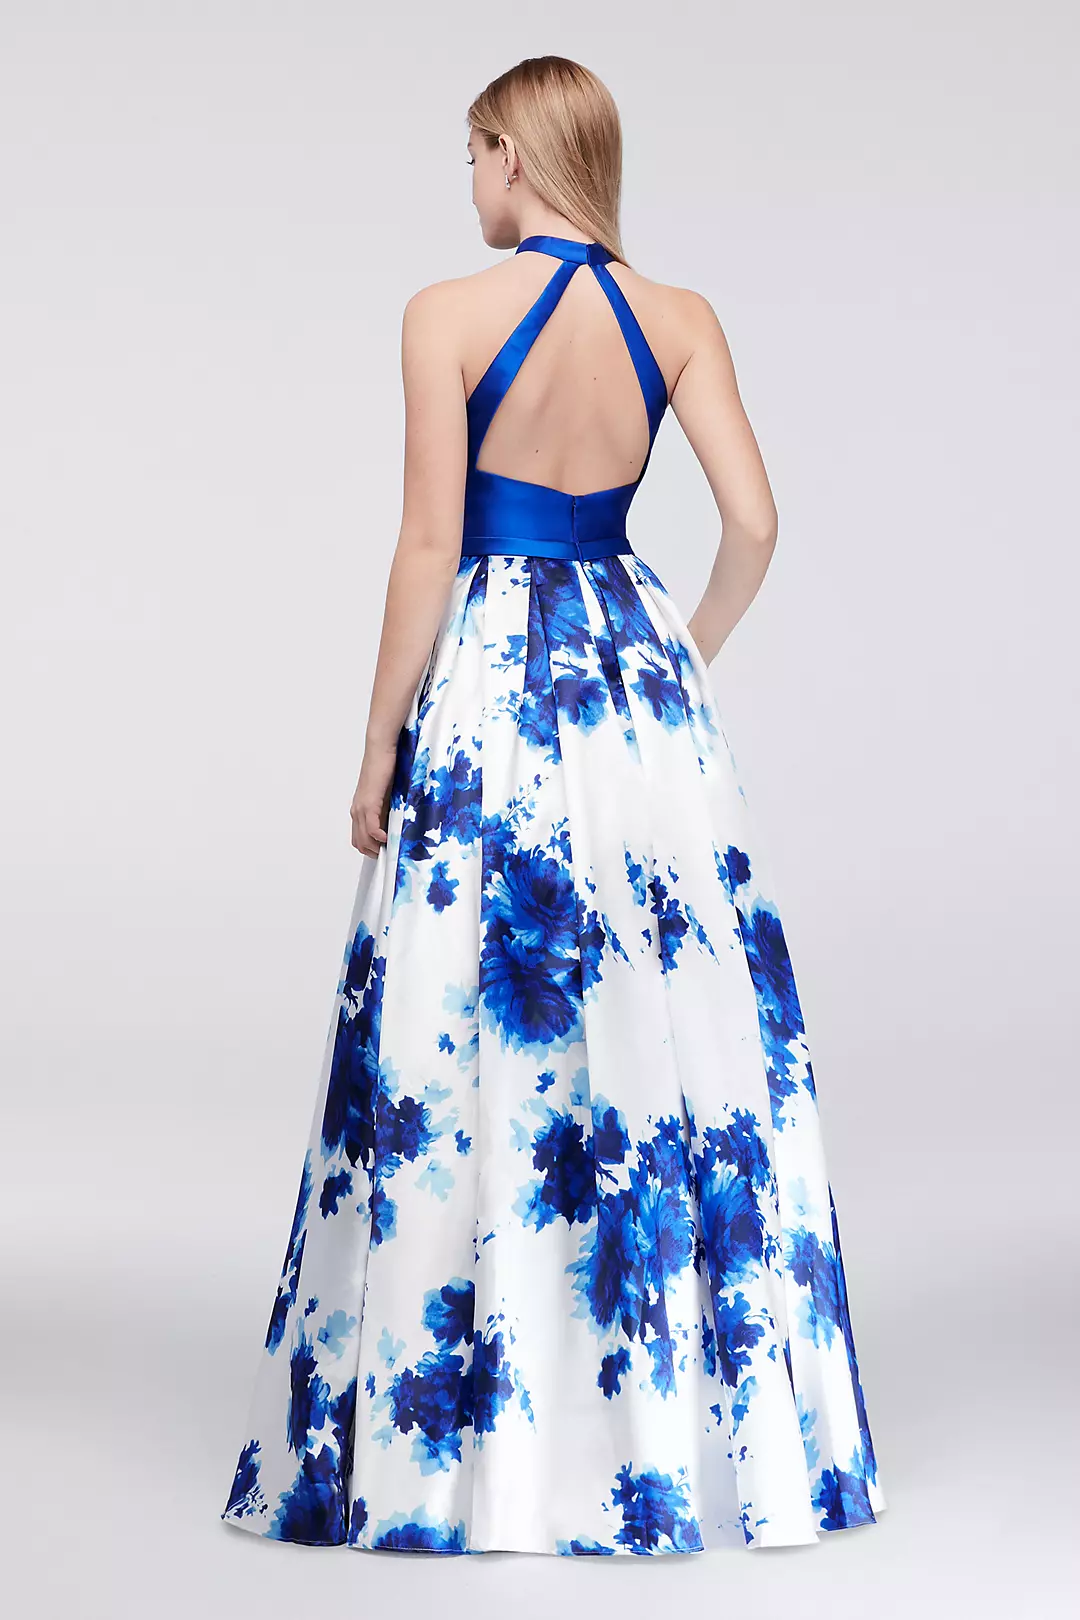 Mikado Halter Ball Gown with Floral-Print Skirt Image 2